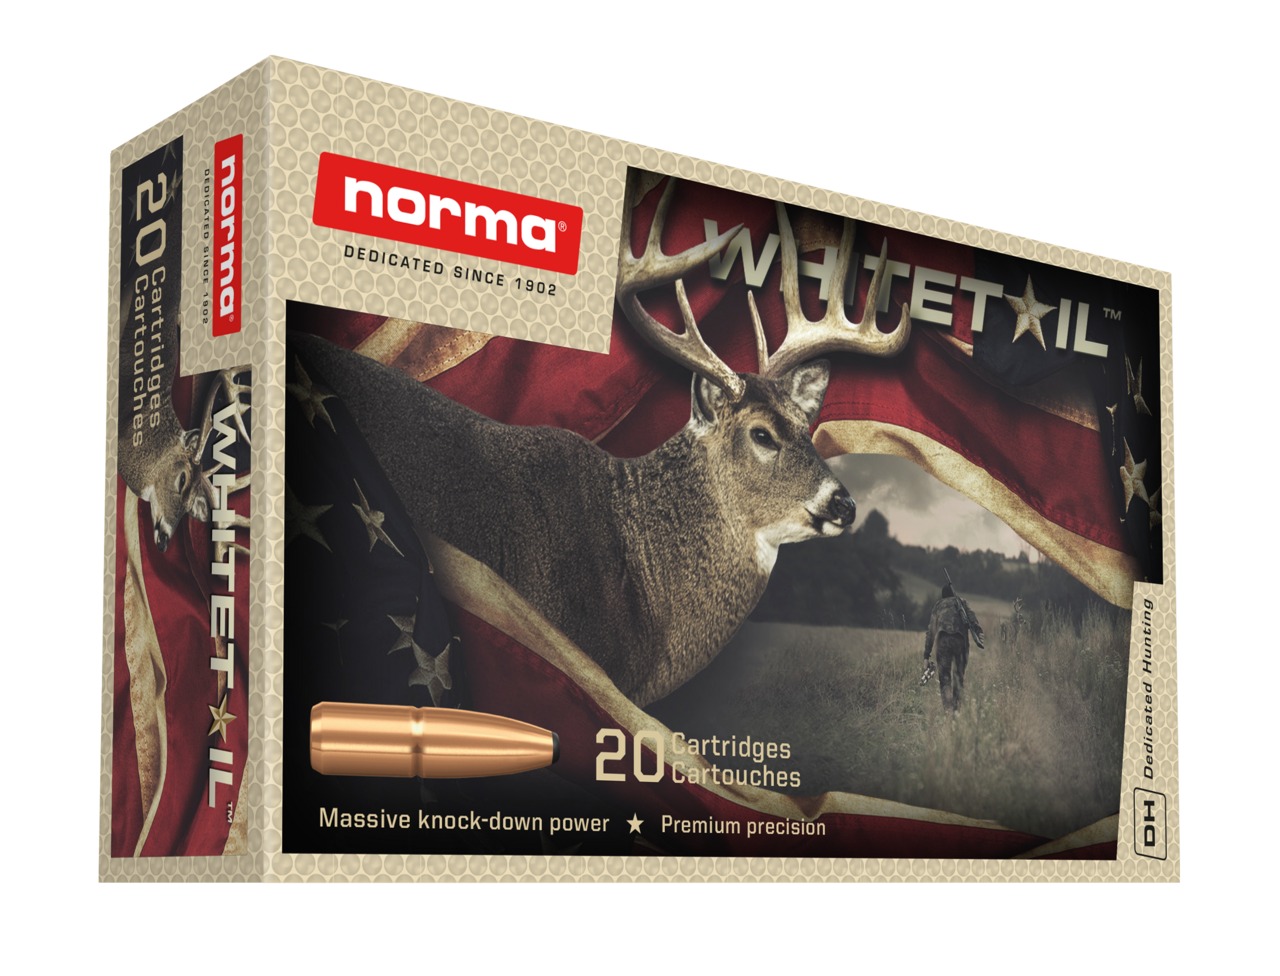 CART NORMA 9.3X62 18.5G/285GR WHITETAIL BTE 20 ref 20193502 NORMA